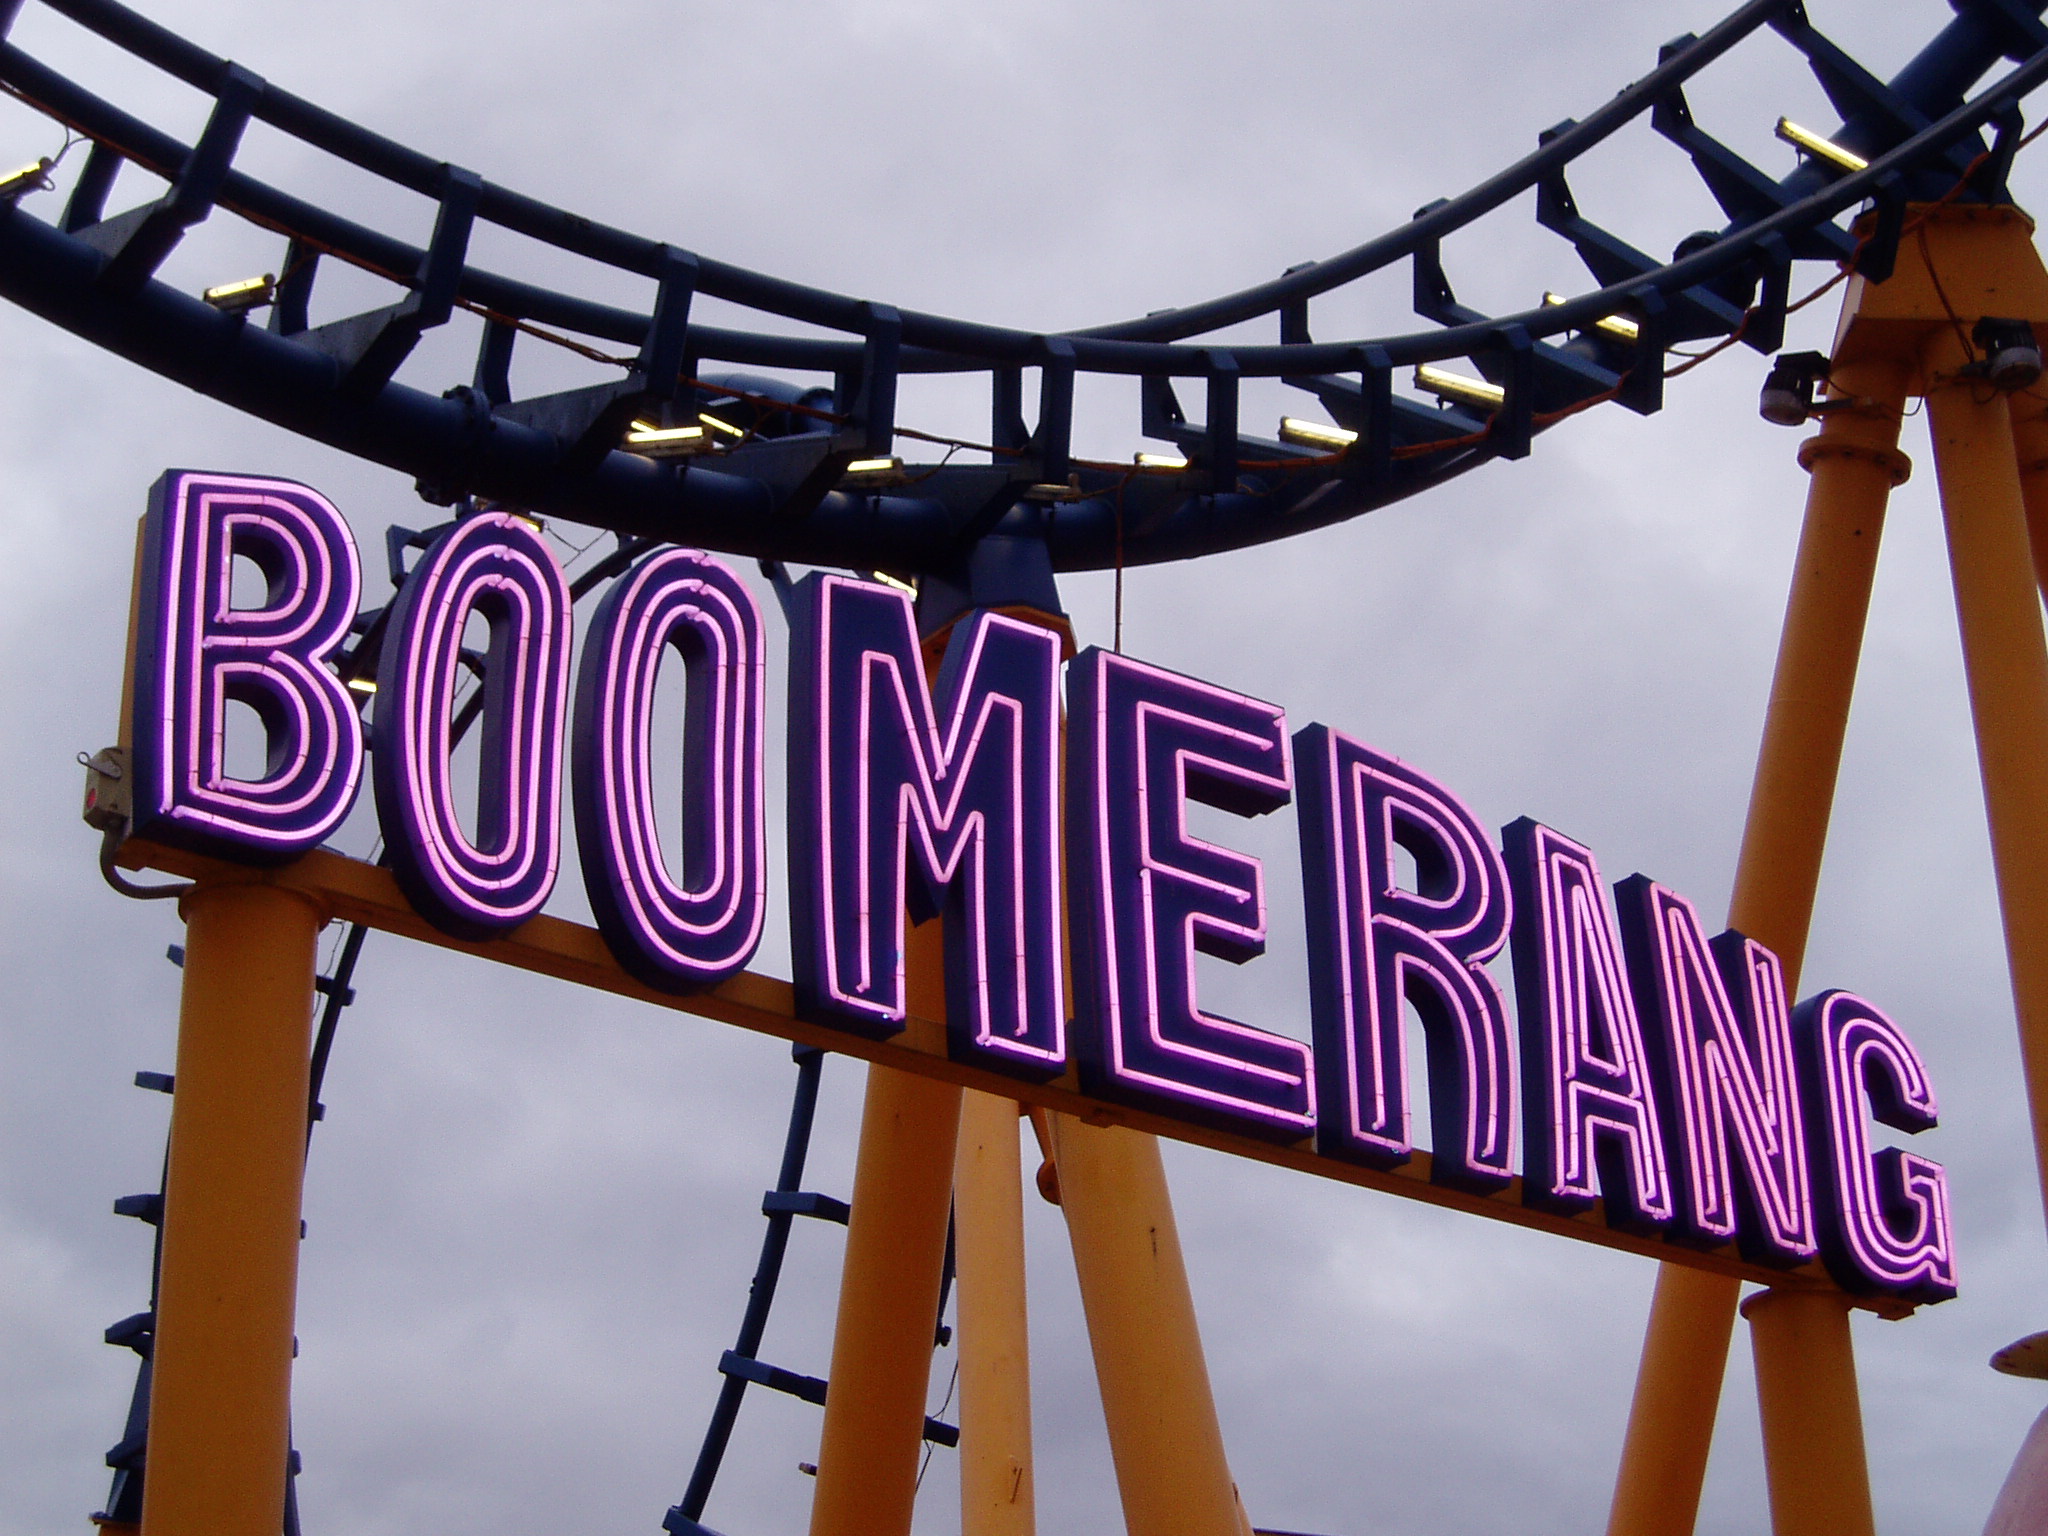 You are currently viewing Boomerang (Wiener Prater)